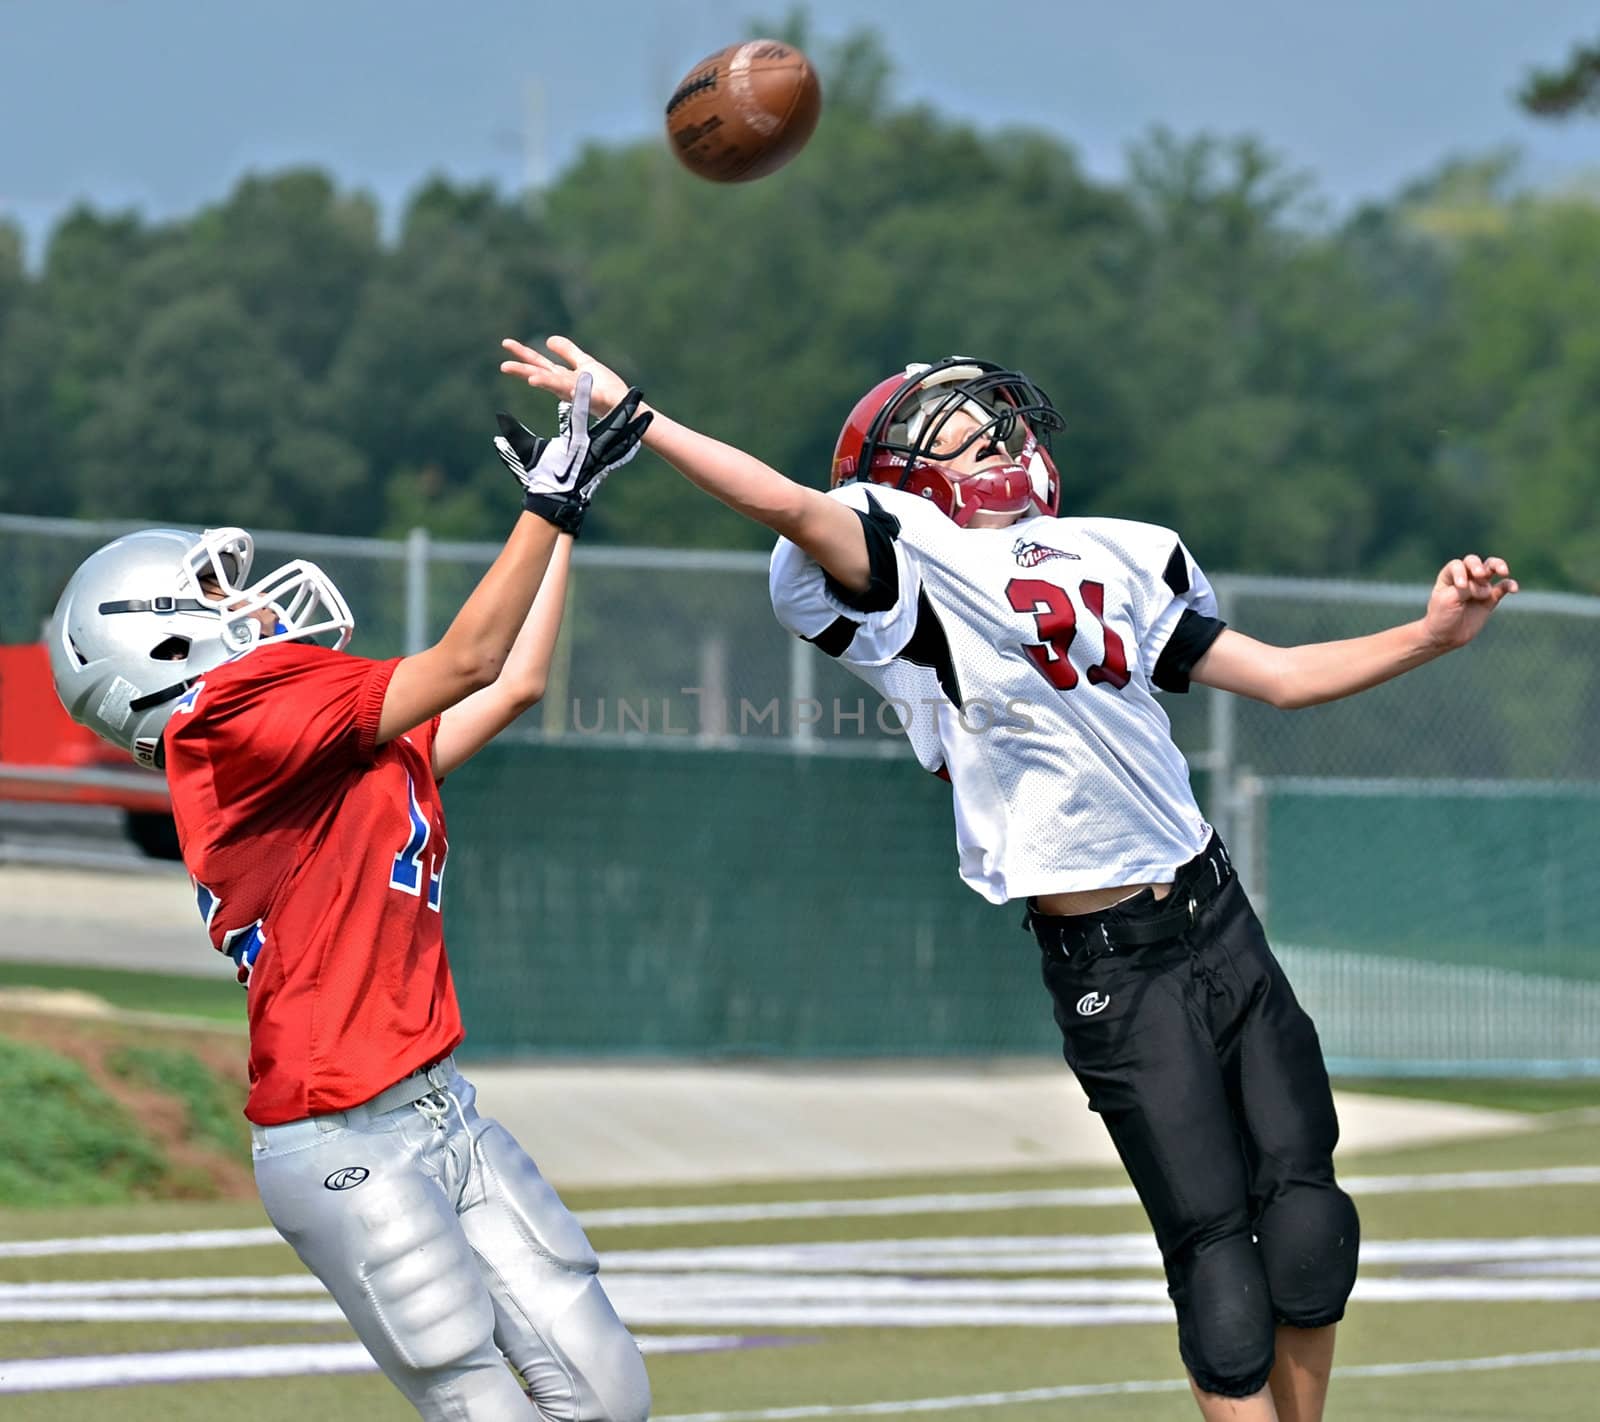 CUMMING, GA/USA - SEPTEMBER 8: Unidentified boys fighting for the pass at the goal line. A team of 7th grade boys September 9, 2012 in Cumming GA. The Wildcats  vs The Mustangs.